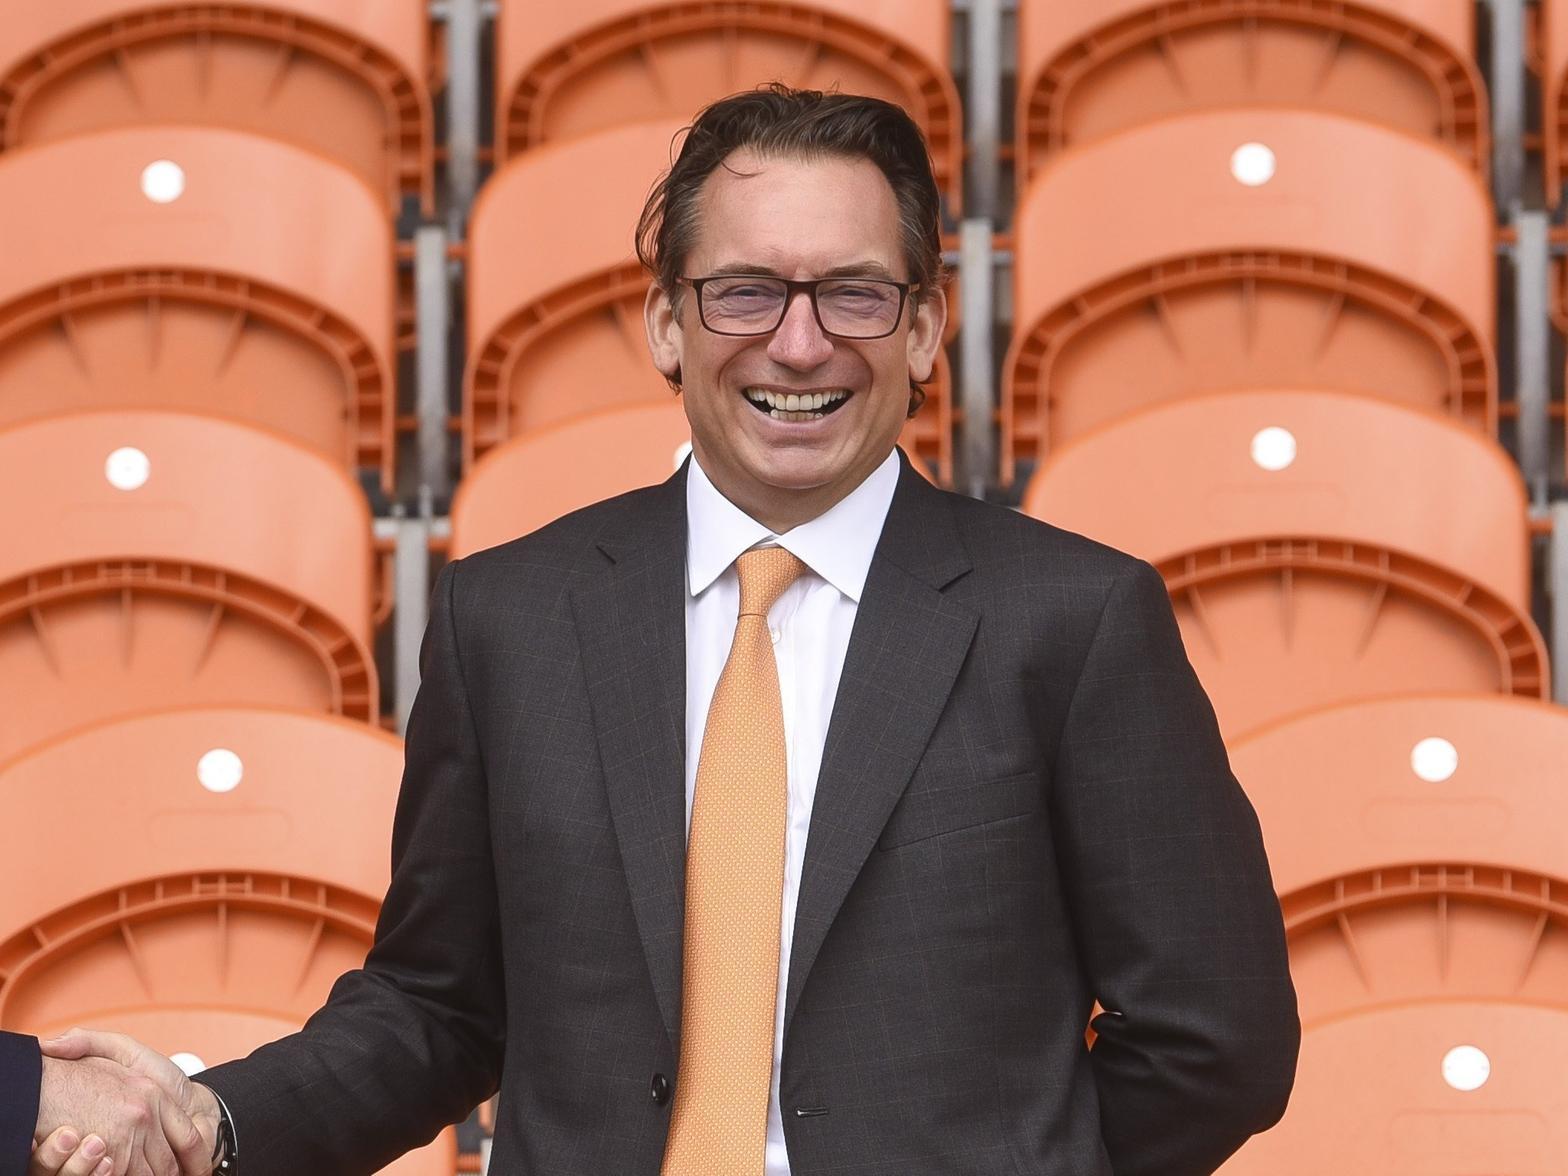 It was the month Blackpool FC fans had been waiting for. After years of protests June saw a new man take charge. Businessman Simon Sadler said it was a great honour and privilege as he bought a 96.2 share in the club.